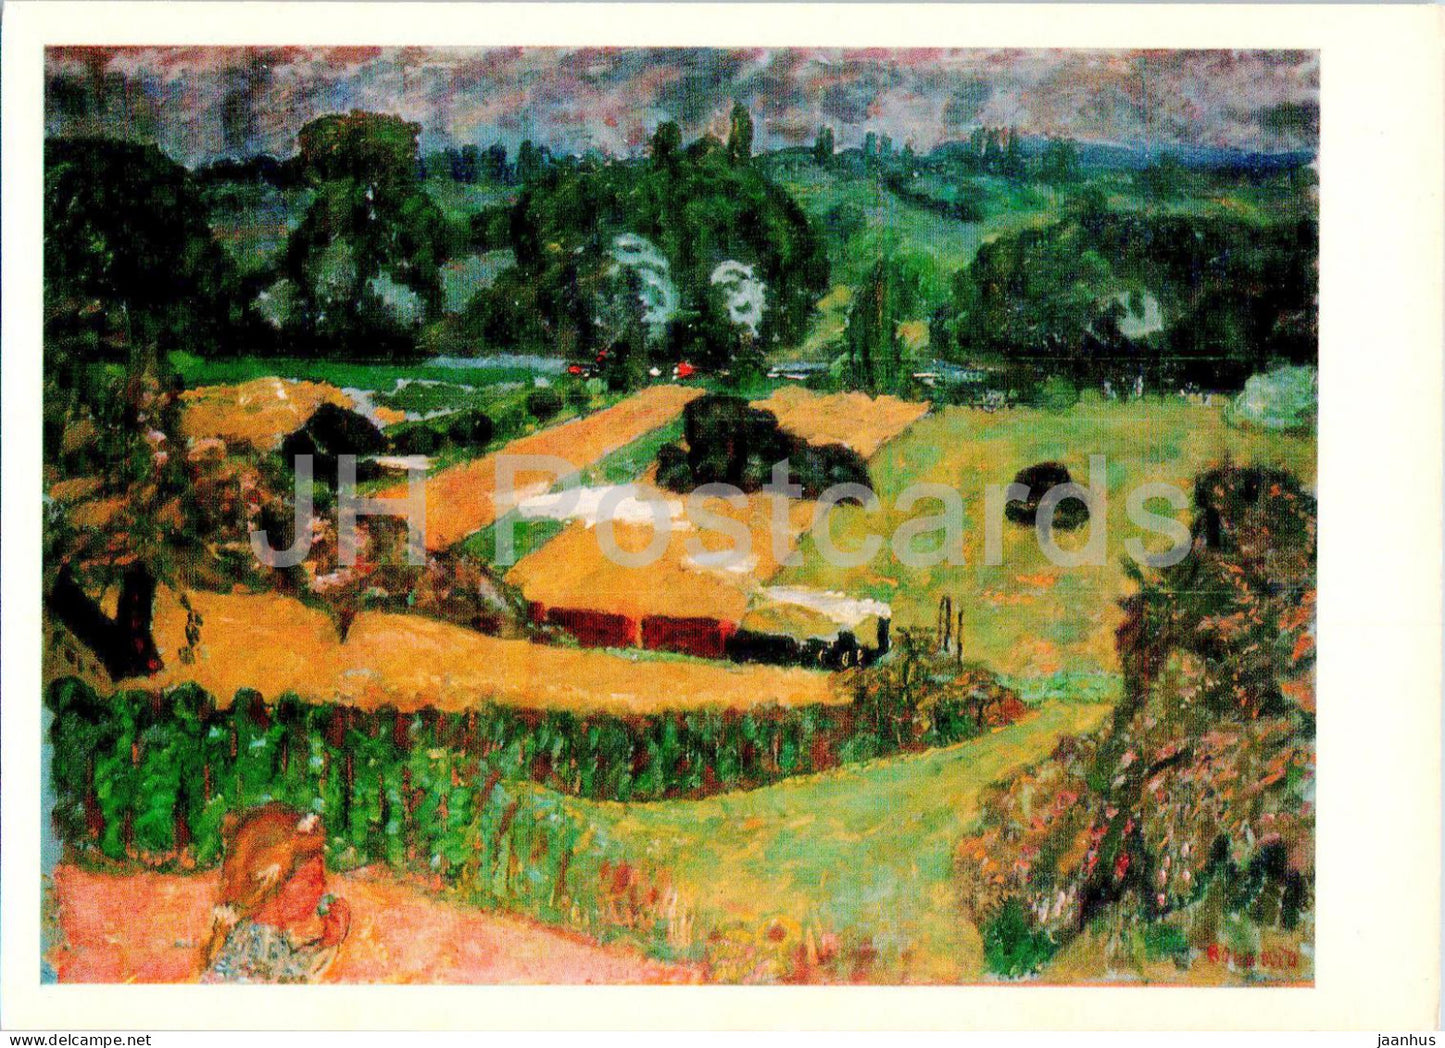 painting by Pierre Bonnard - Landscape with a freight train - French art - 1977 - Russia USSR - unused - JH Postcards